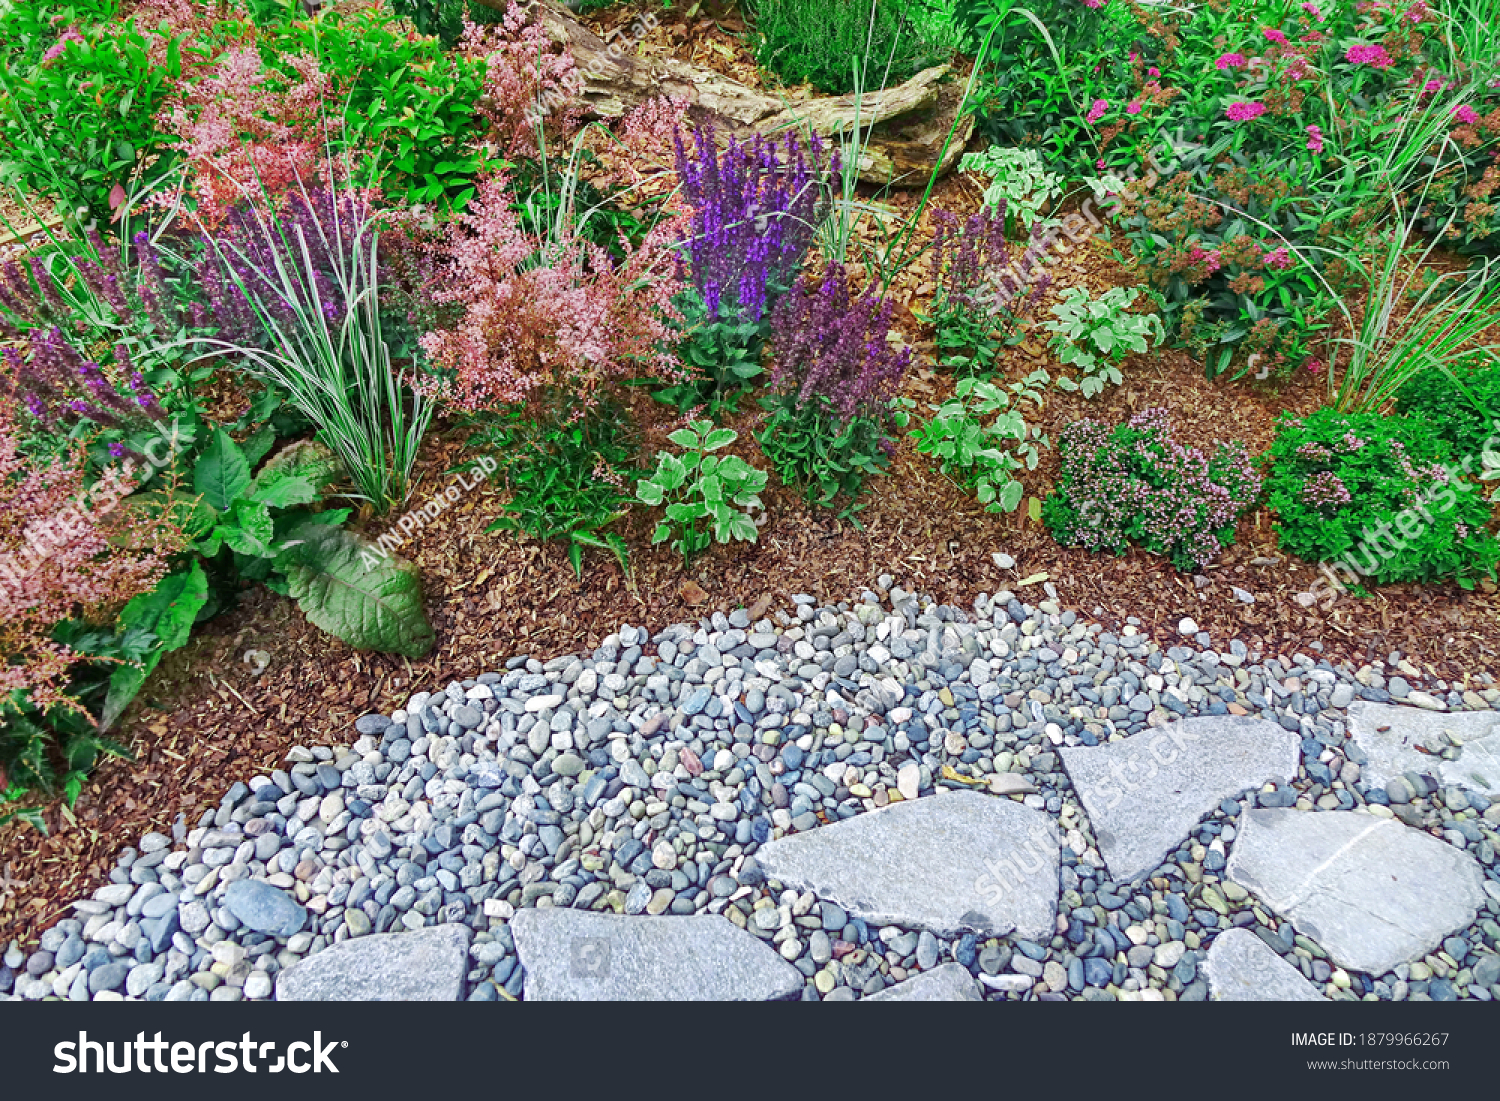 Backyard Garden Modern Designed Landscaping. Decorative Garden Design. Back Yard Lawn And Natural Mulched Border Between Grass, Plants And Pebble, Gravel Or Stone Walk Path. #1879966267